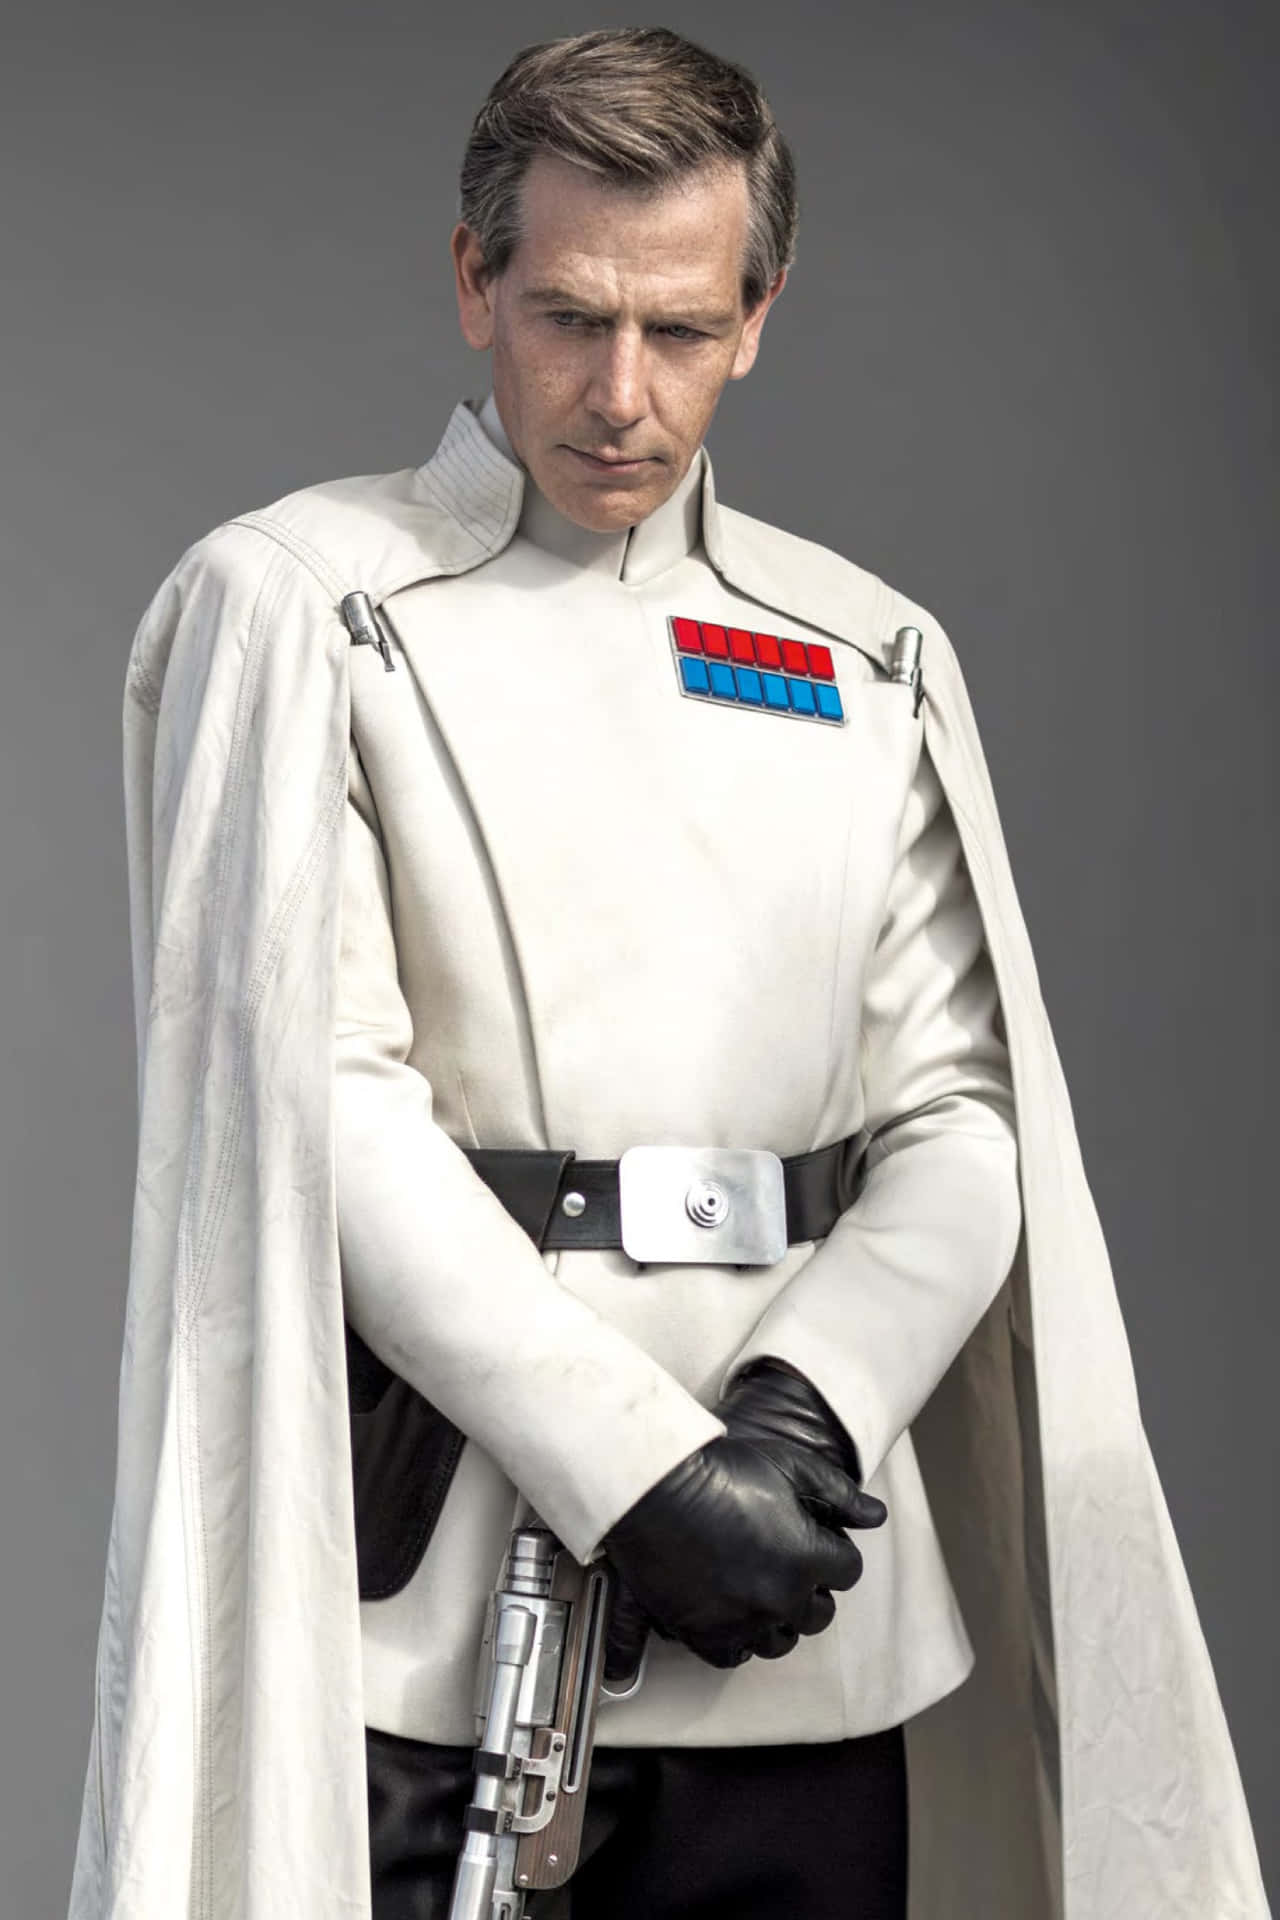 Imperial Officerin White Uniform Background